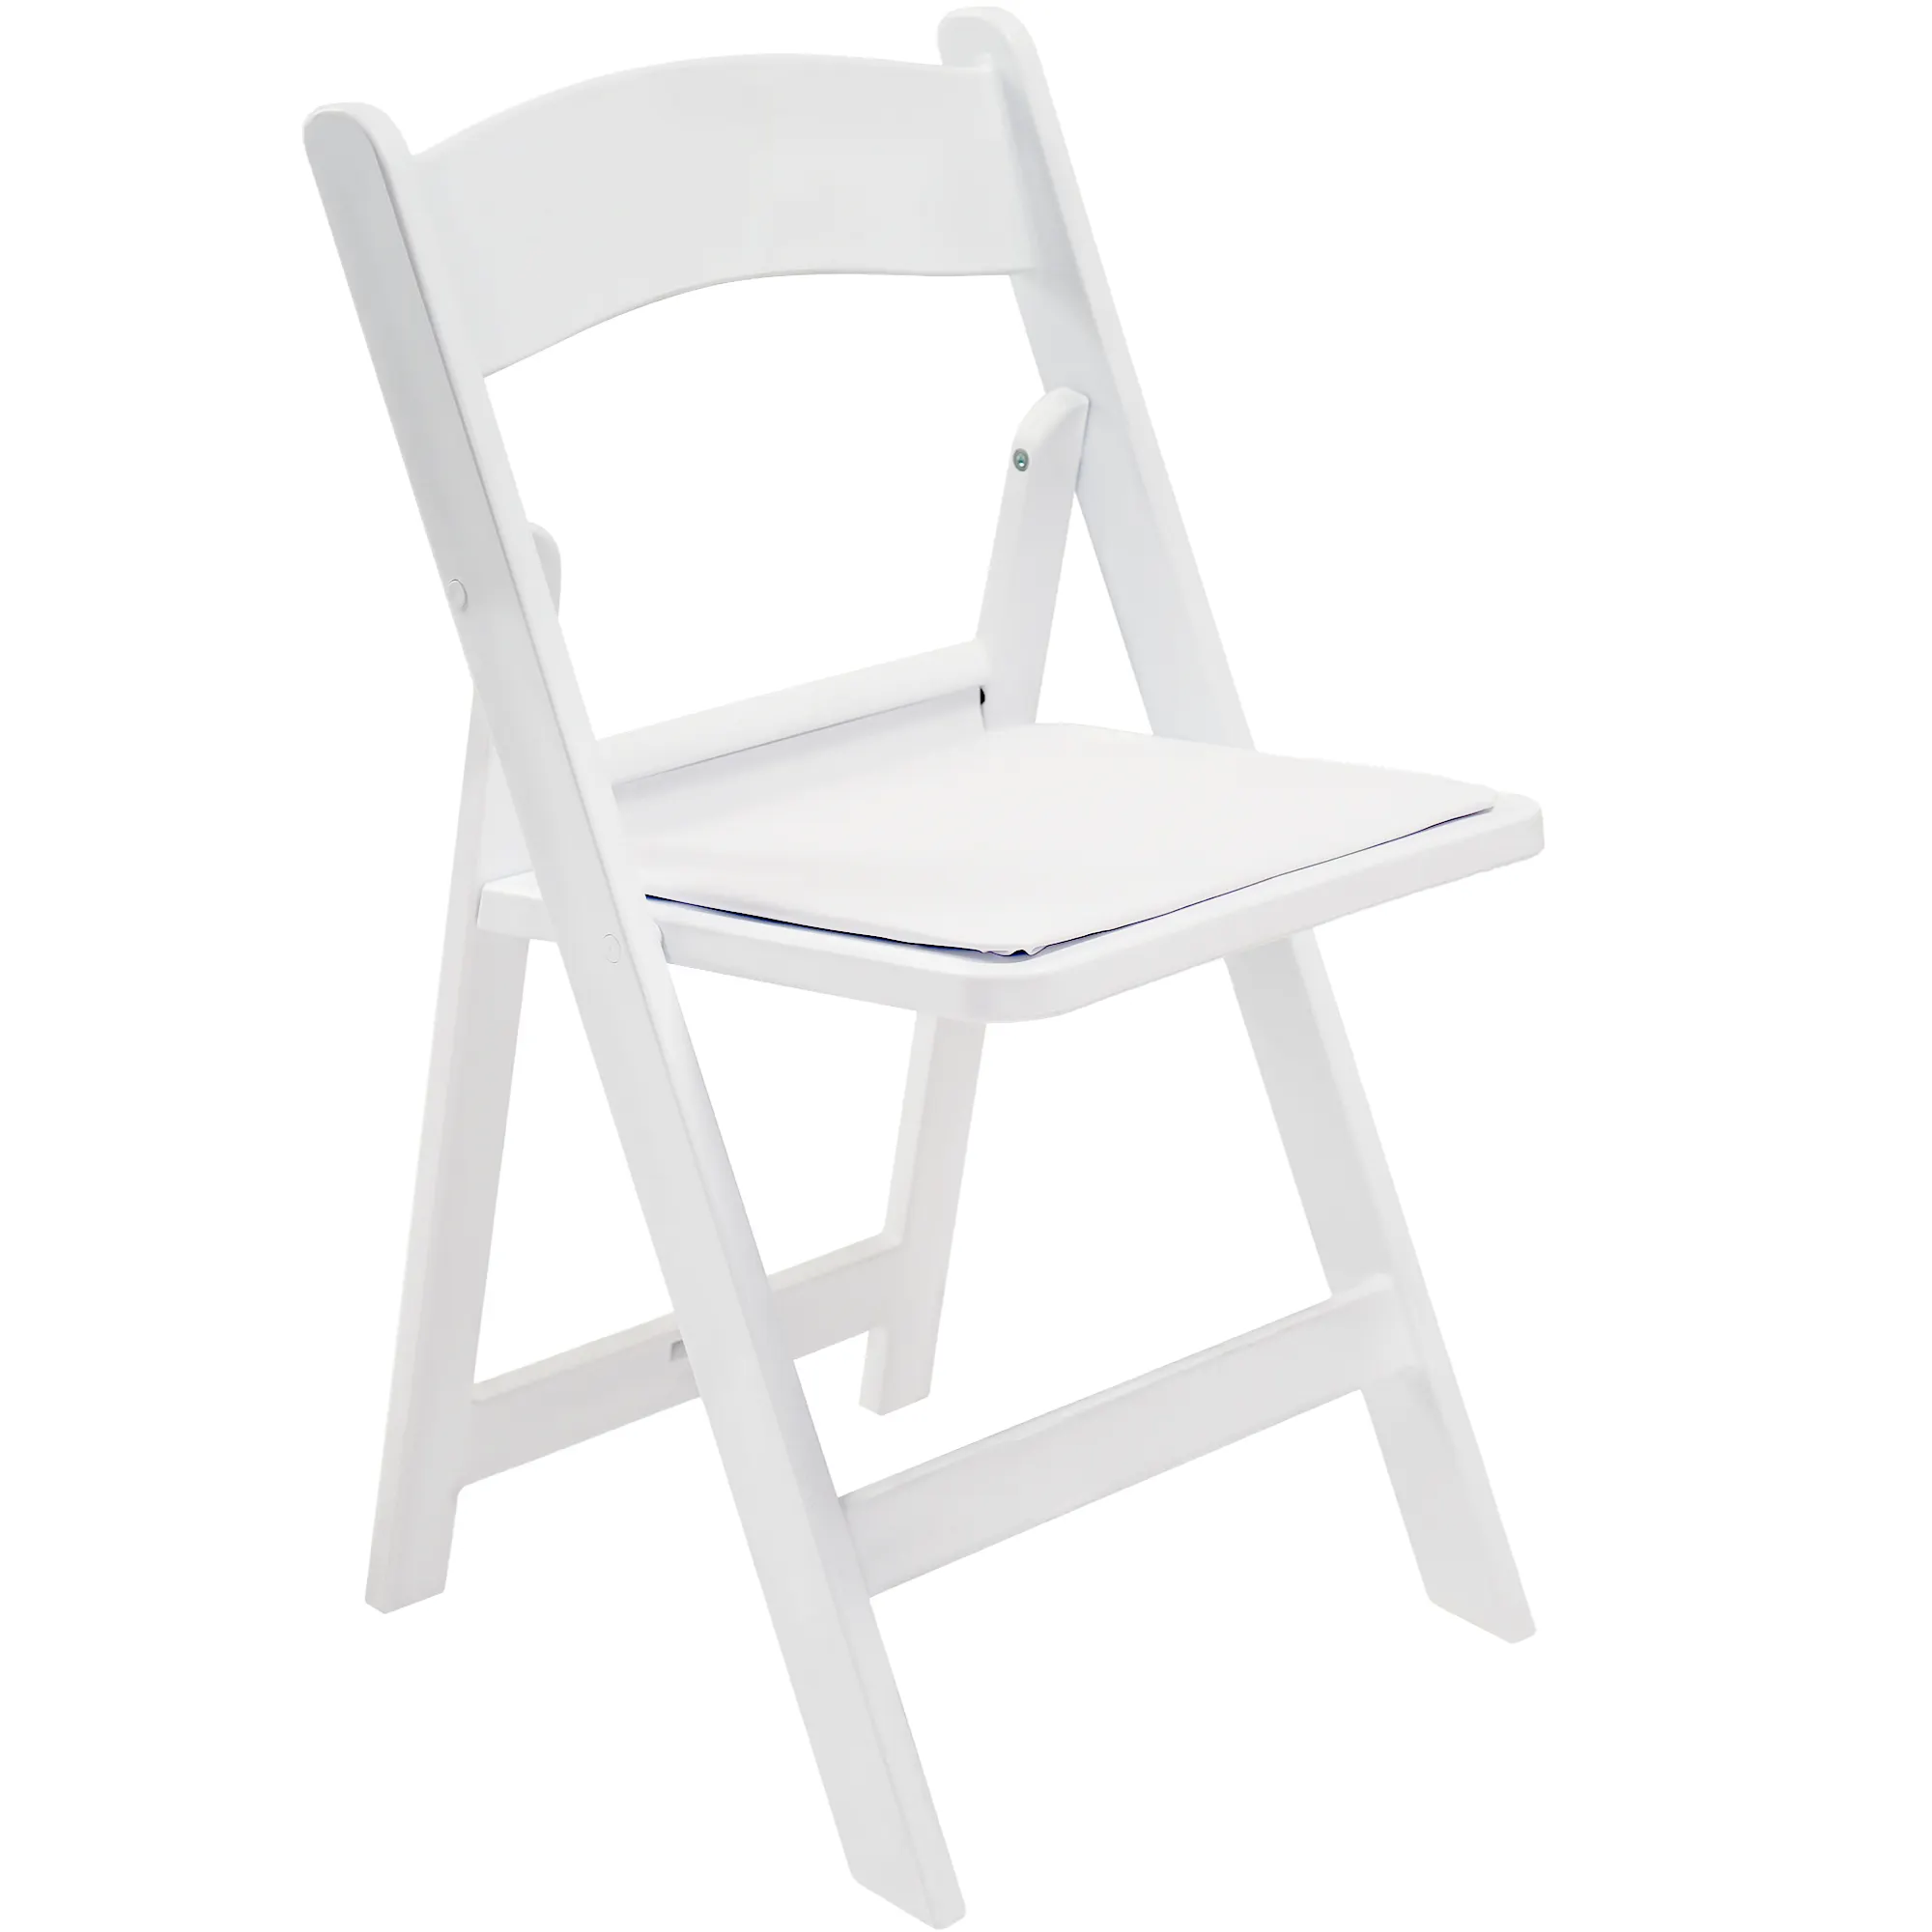 High Quality Vingli padded seat outdoor wedding banquet white plastic resin folding dining chairs